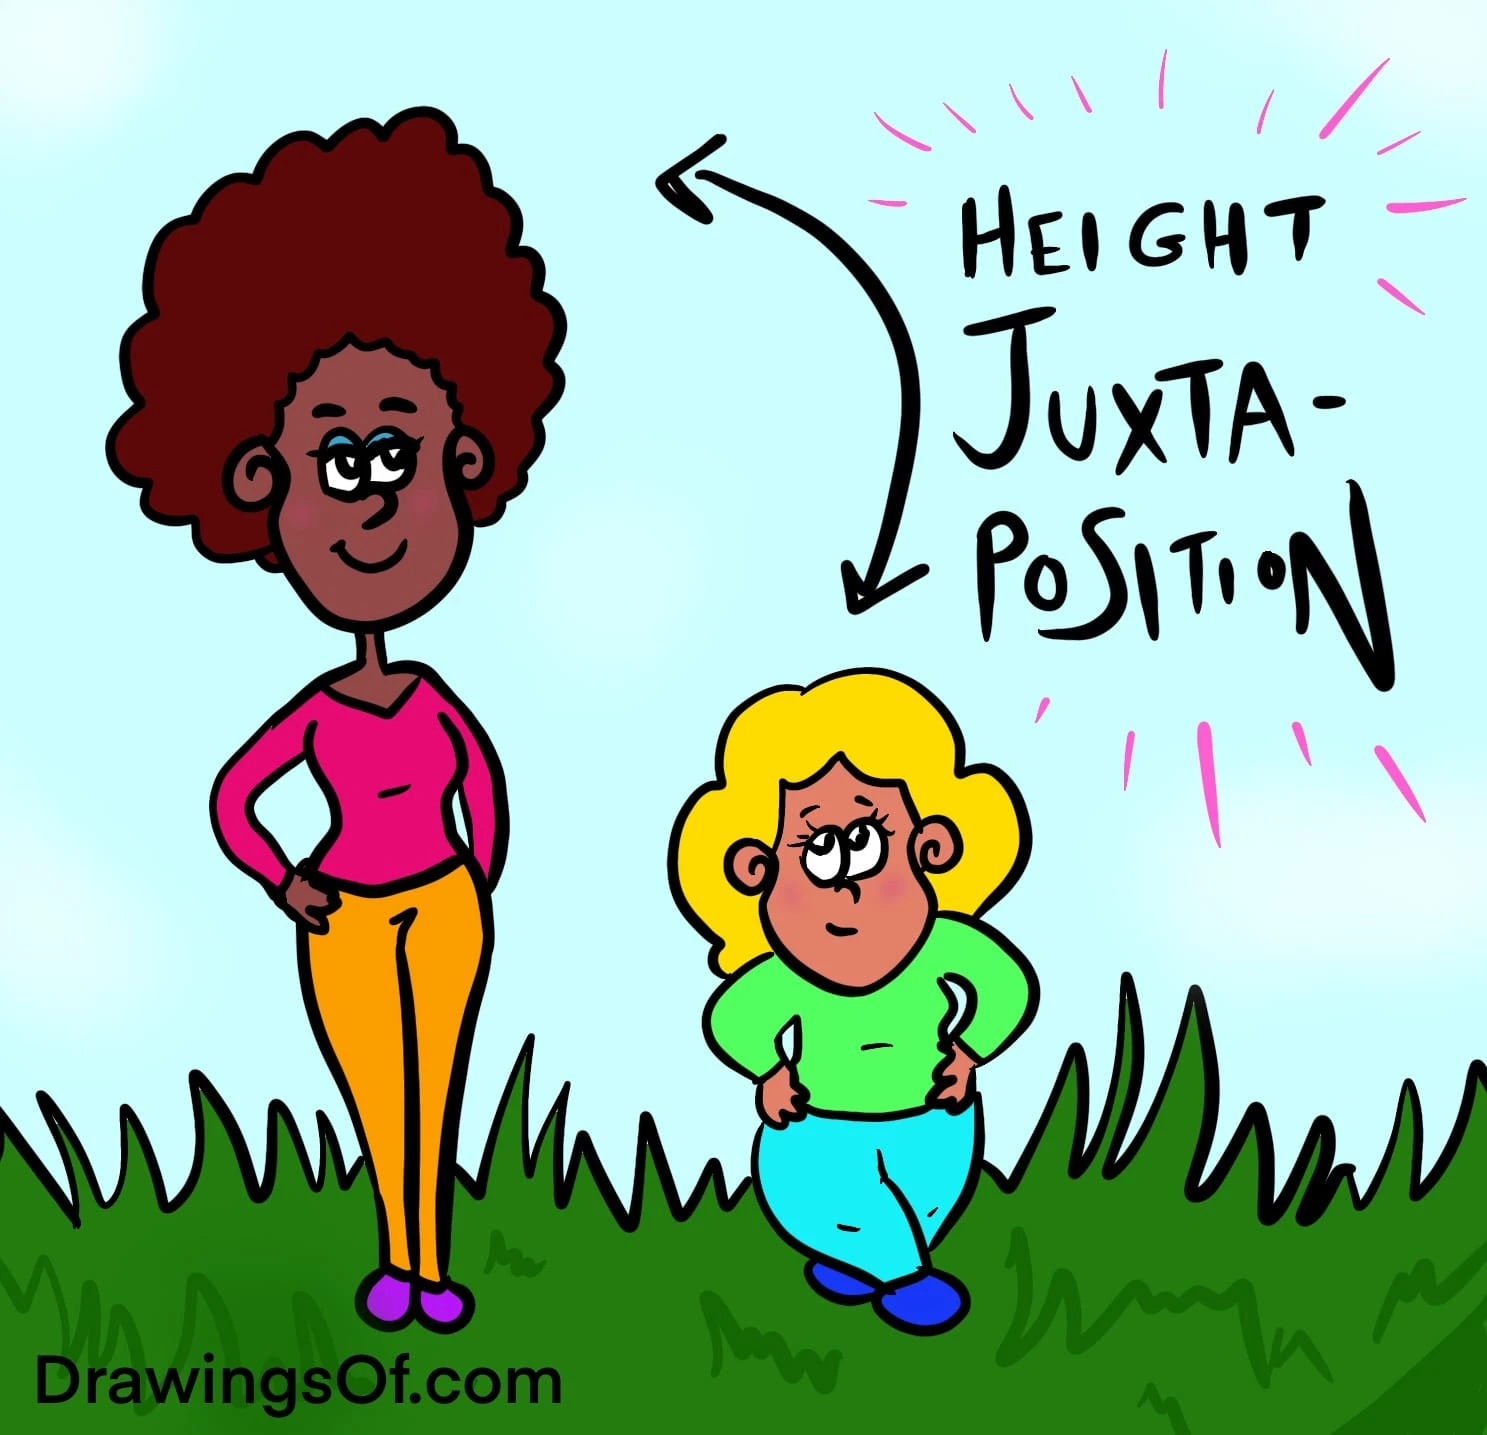 Juxtaposition sentences and example cartoon art: different heights